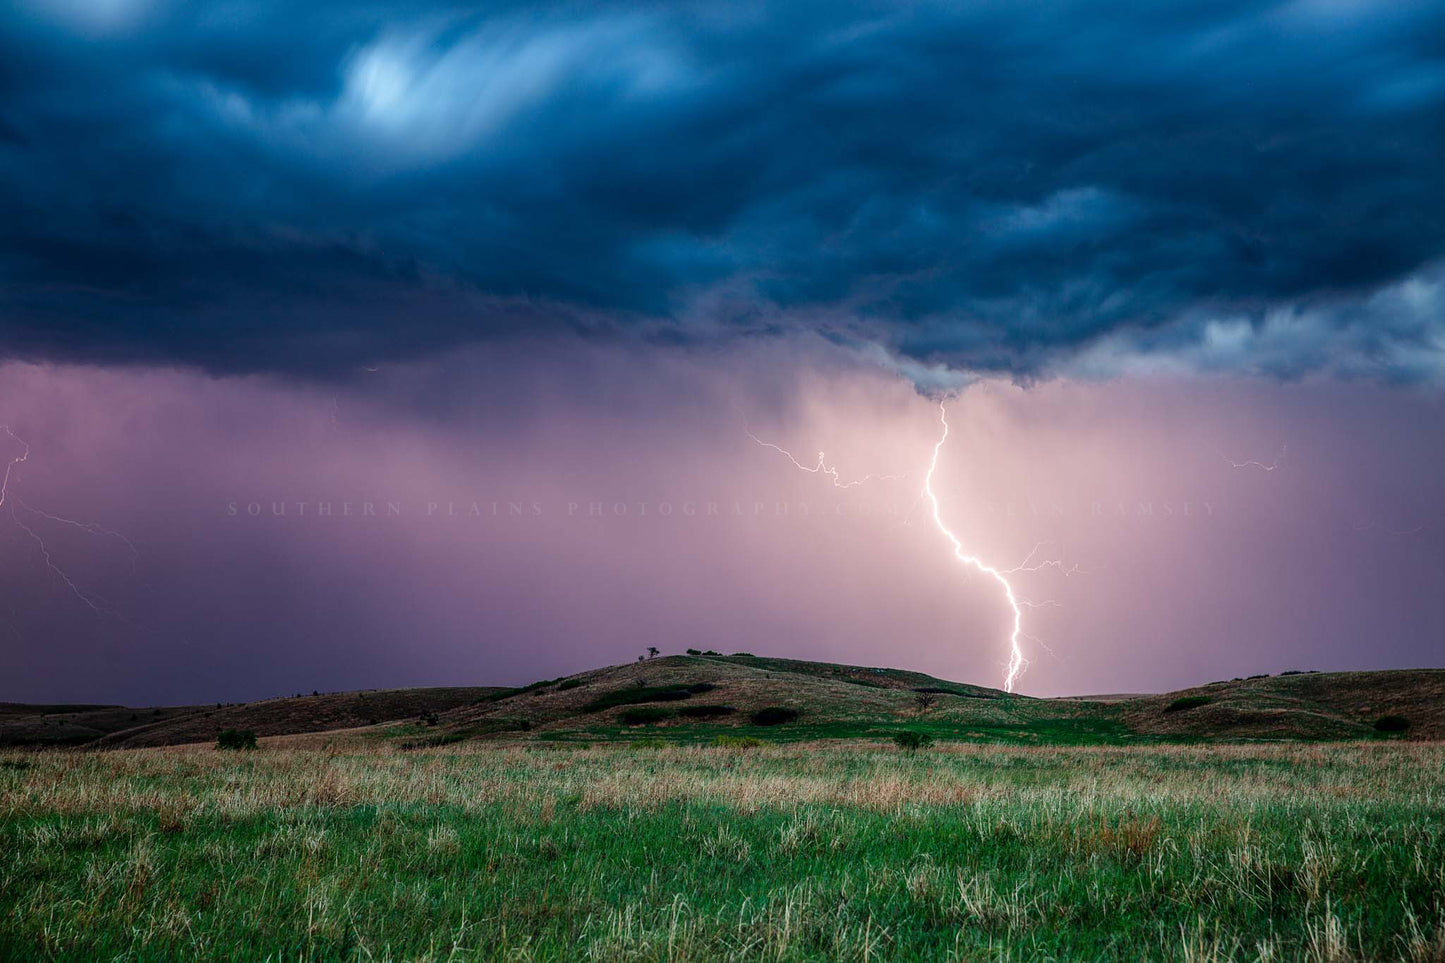 Great plains photography print of lightning striking near a hill on a stormy spring night in Kansas by Sean Ramsey of Southern Plains Photography.